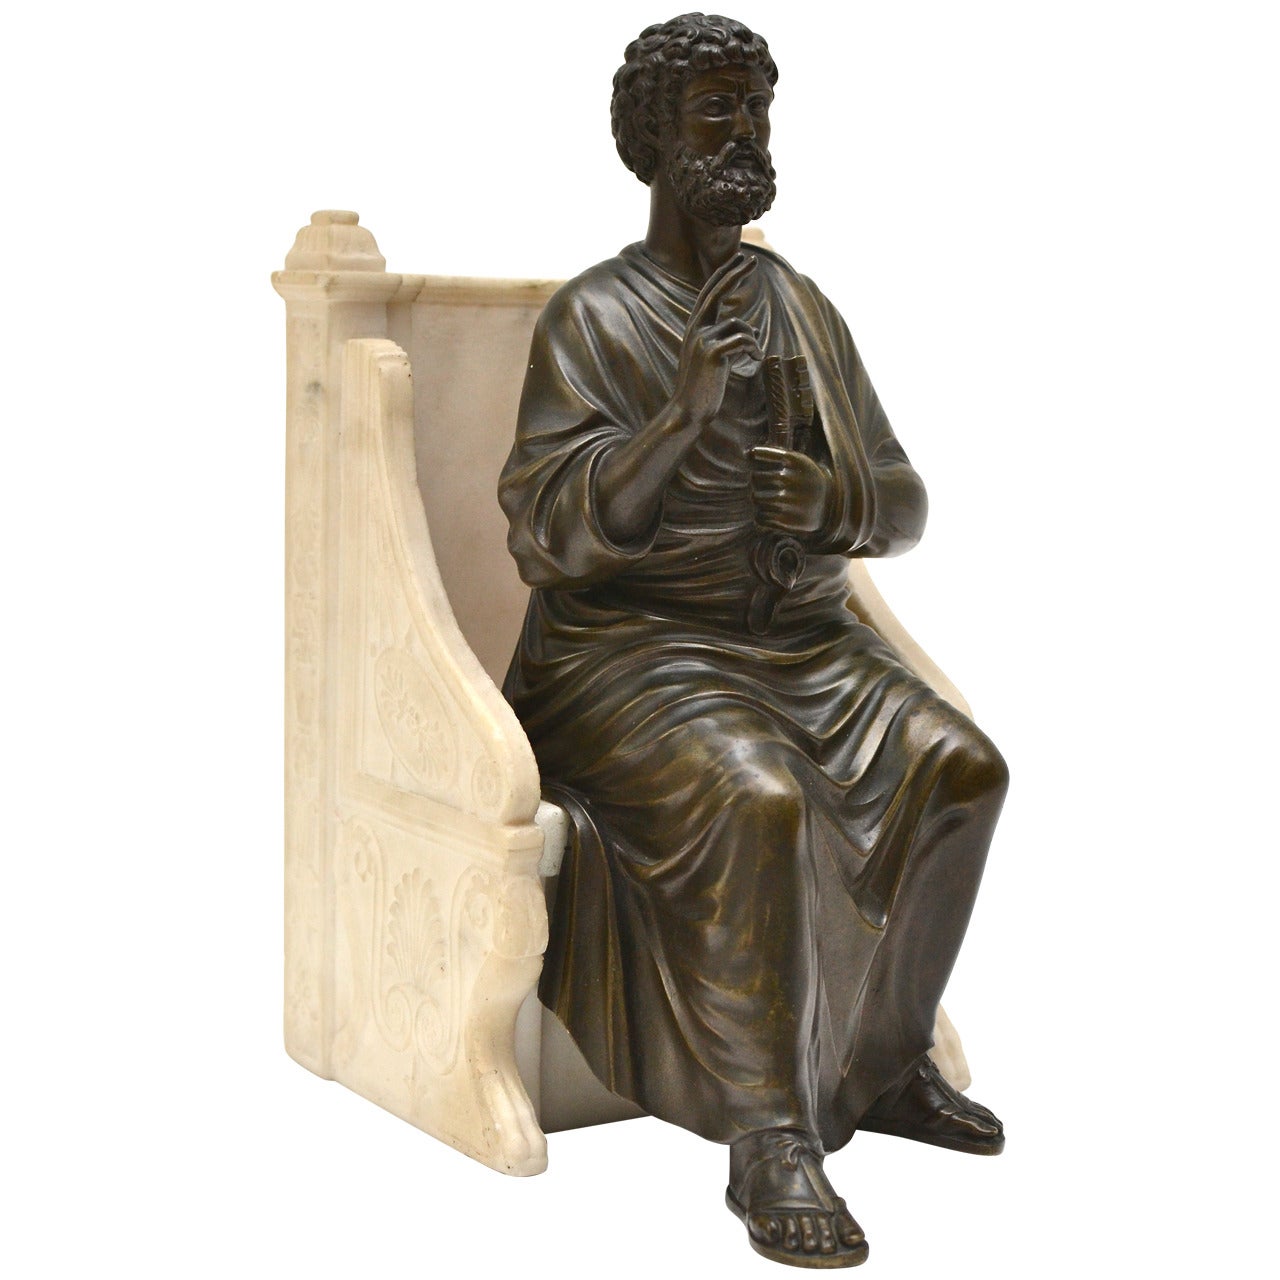 Bronze Sculpture of St. Peter Seated on a Alabaster Throne Chair, 19th Century